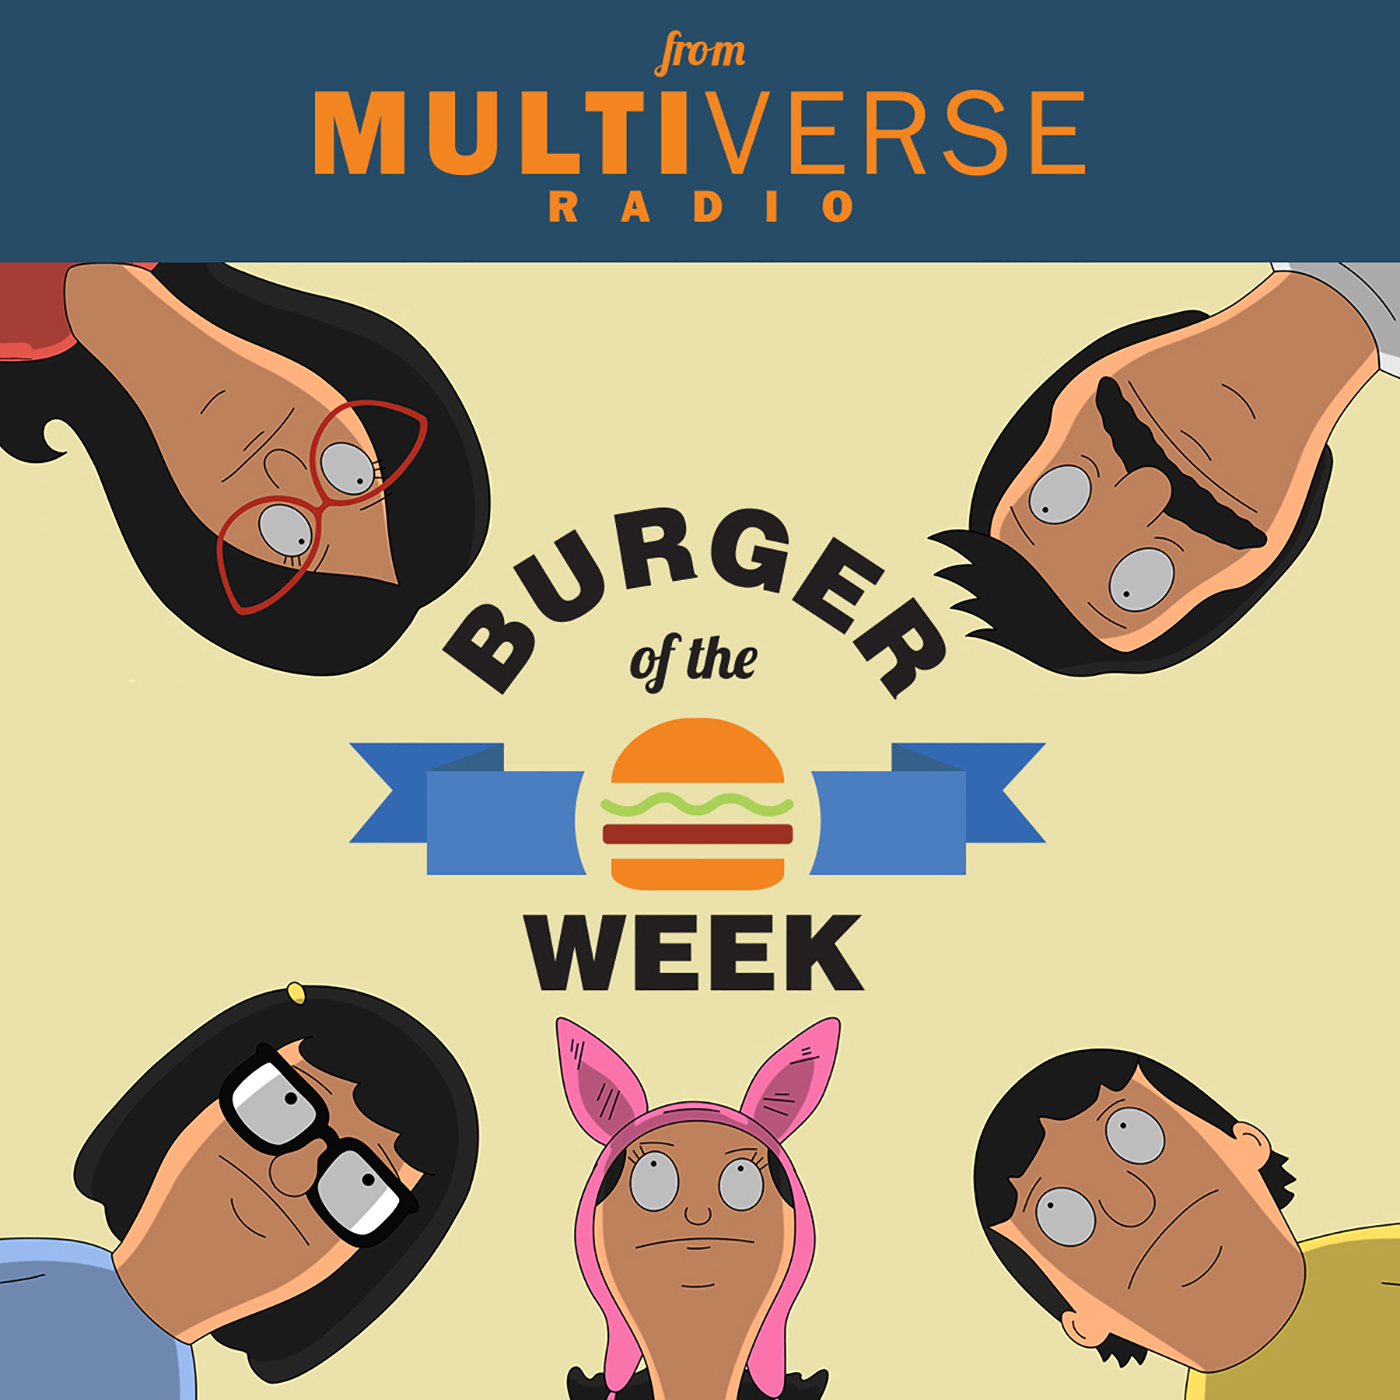 Burger of the Week: A Bob's Burgers Podcast